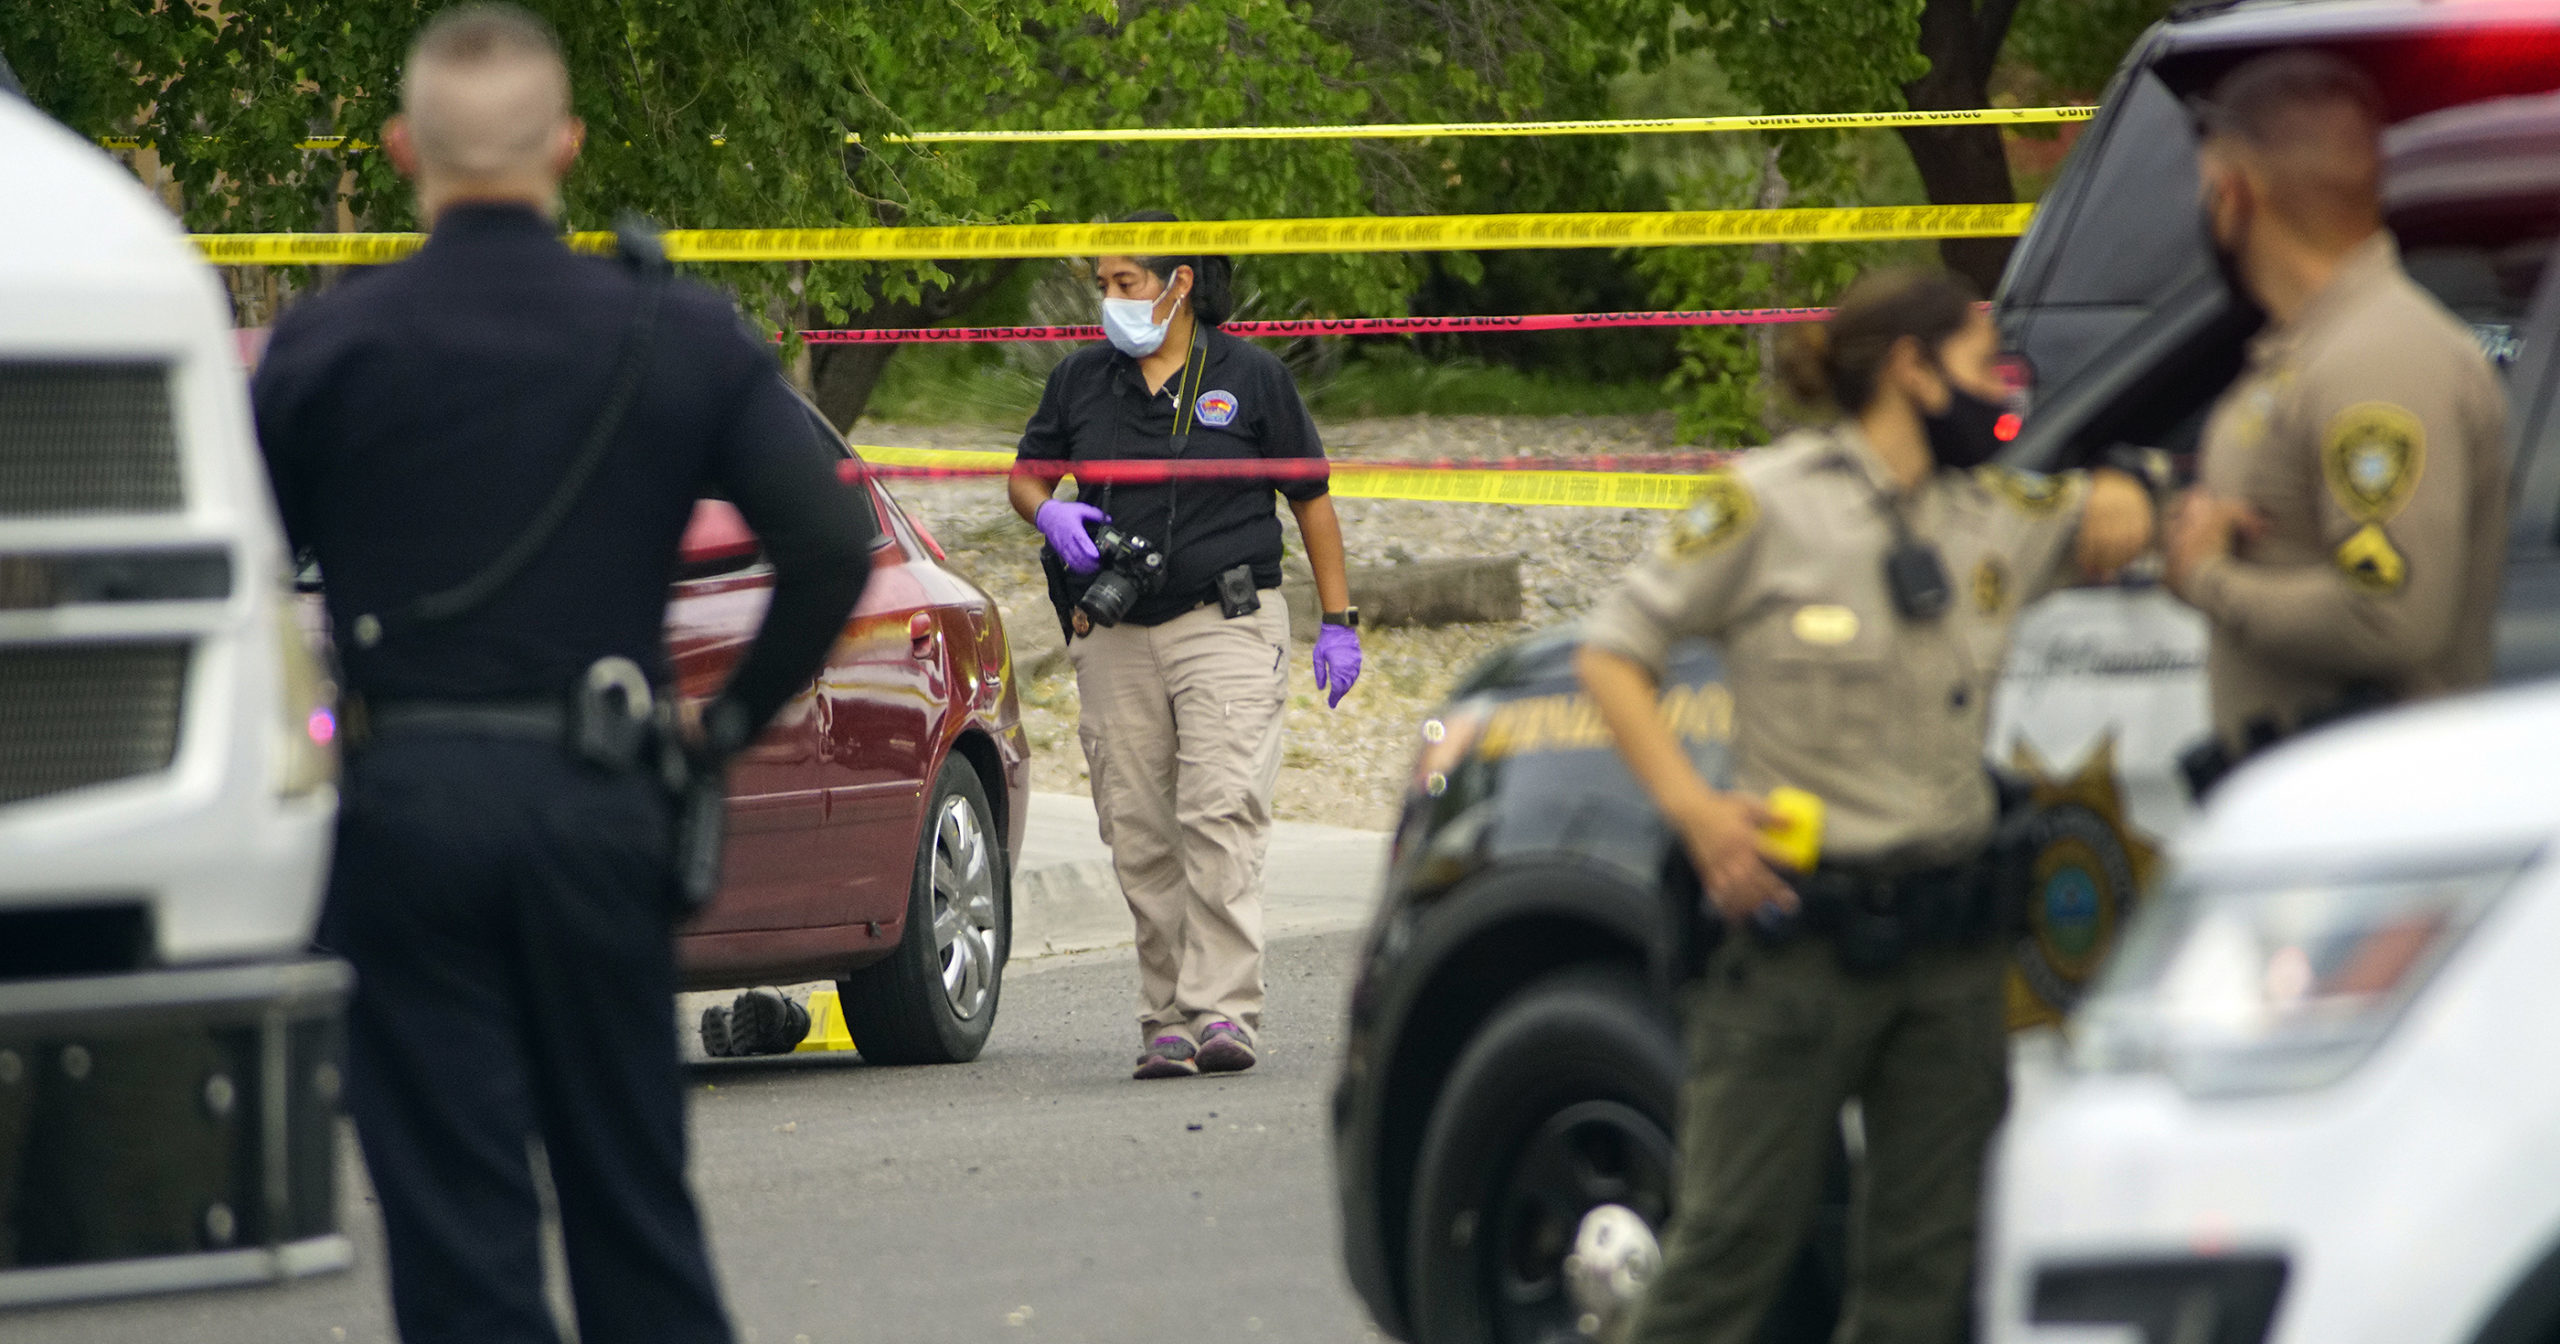 Albuquerque police and Bernalillo County deputies work at the scene of a double shooting on the west side of Albuquerque, New Mexico, the result of a confrontation over a mask on July 21, 2020.